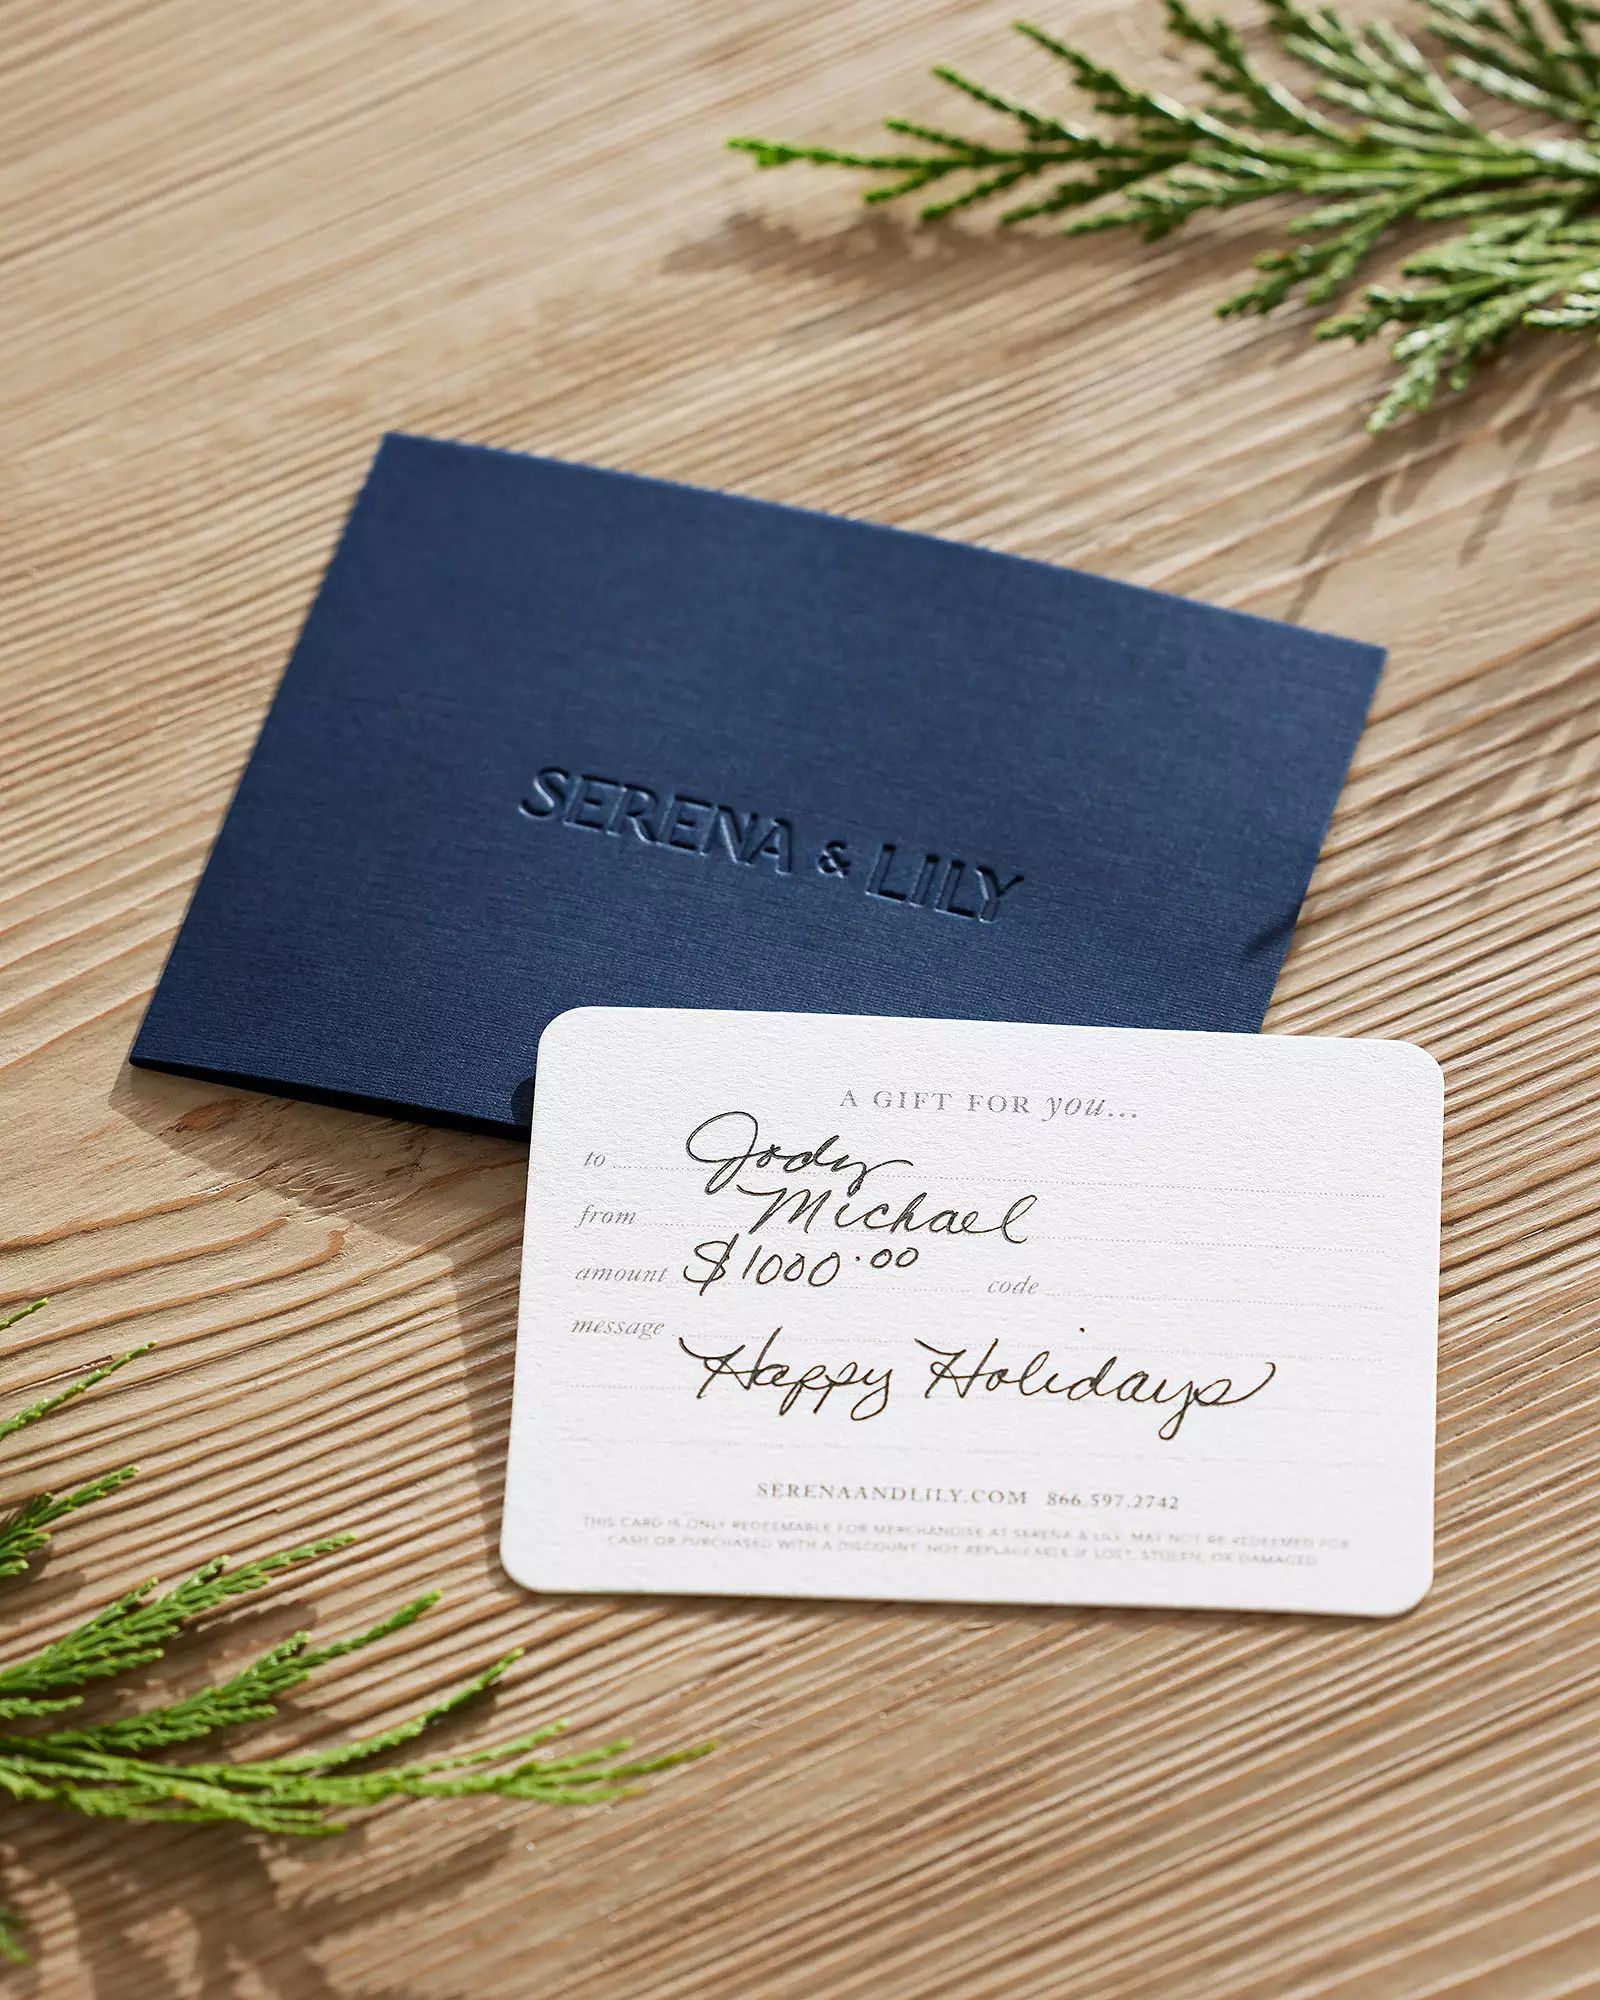 The Serena & Lily Gift Certificate | Serena and Lily